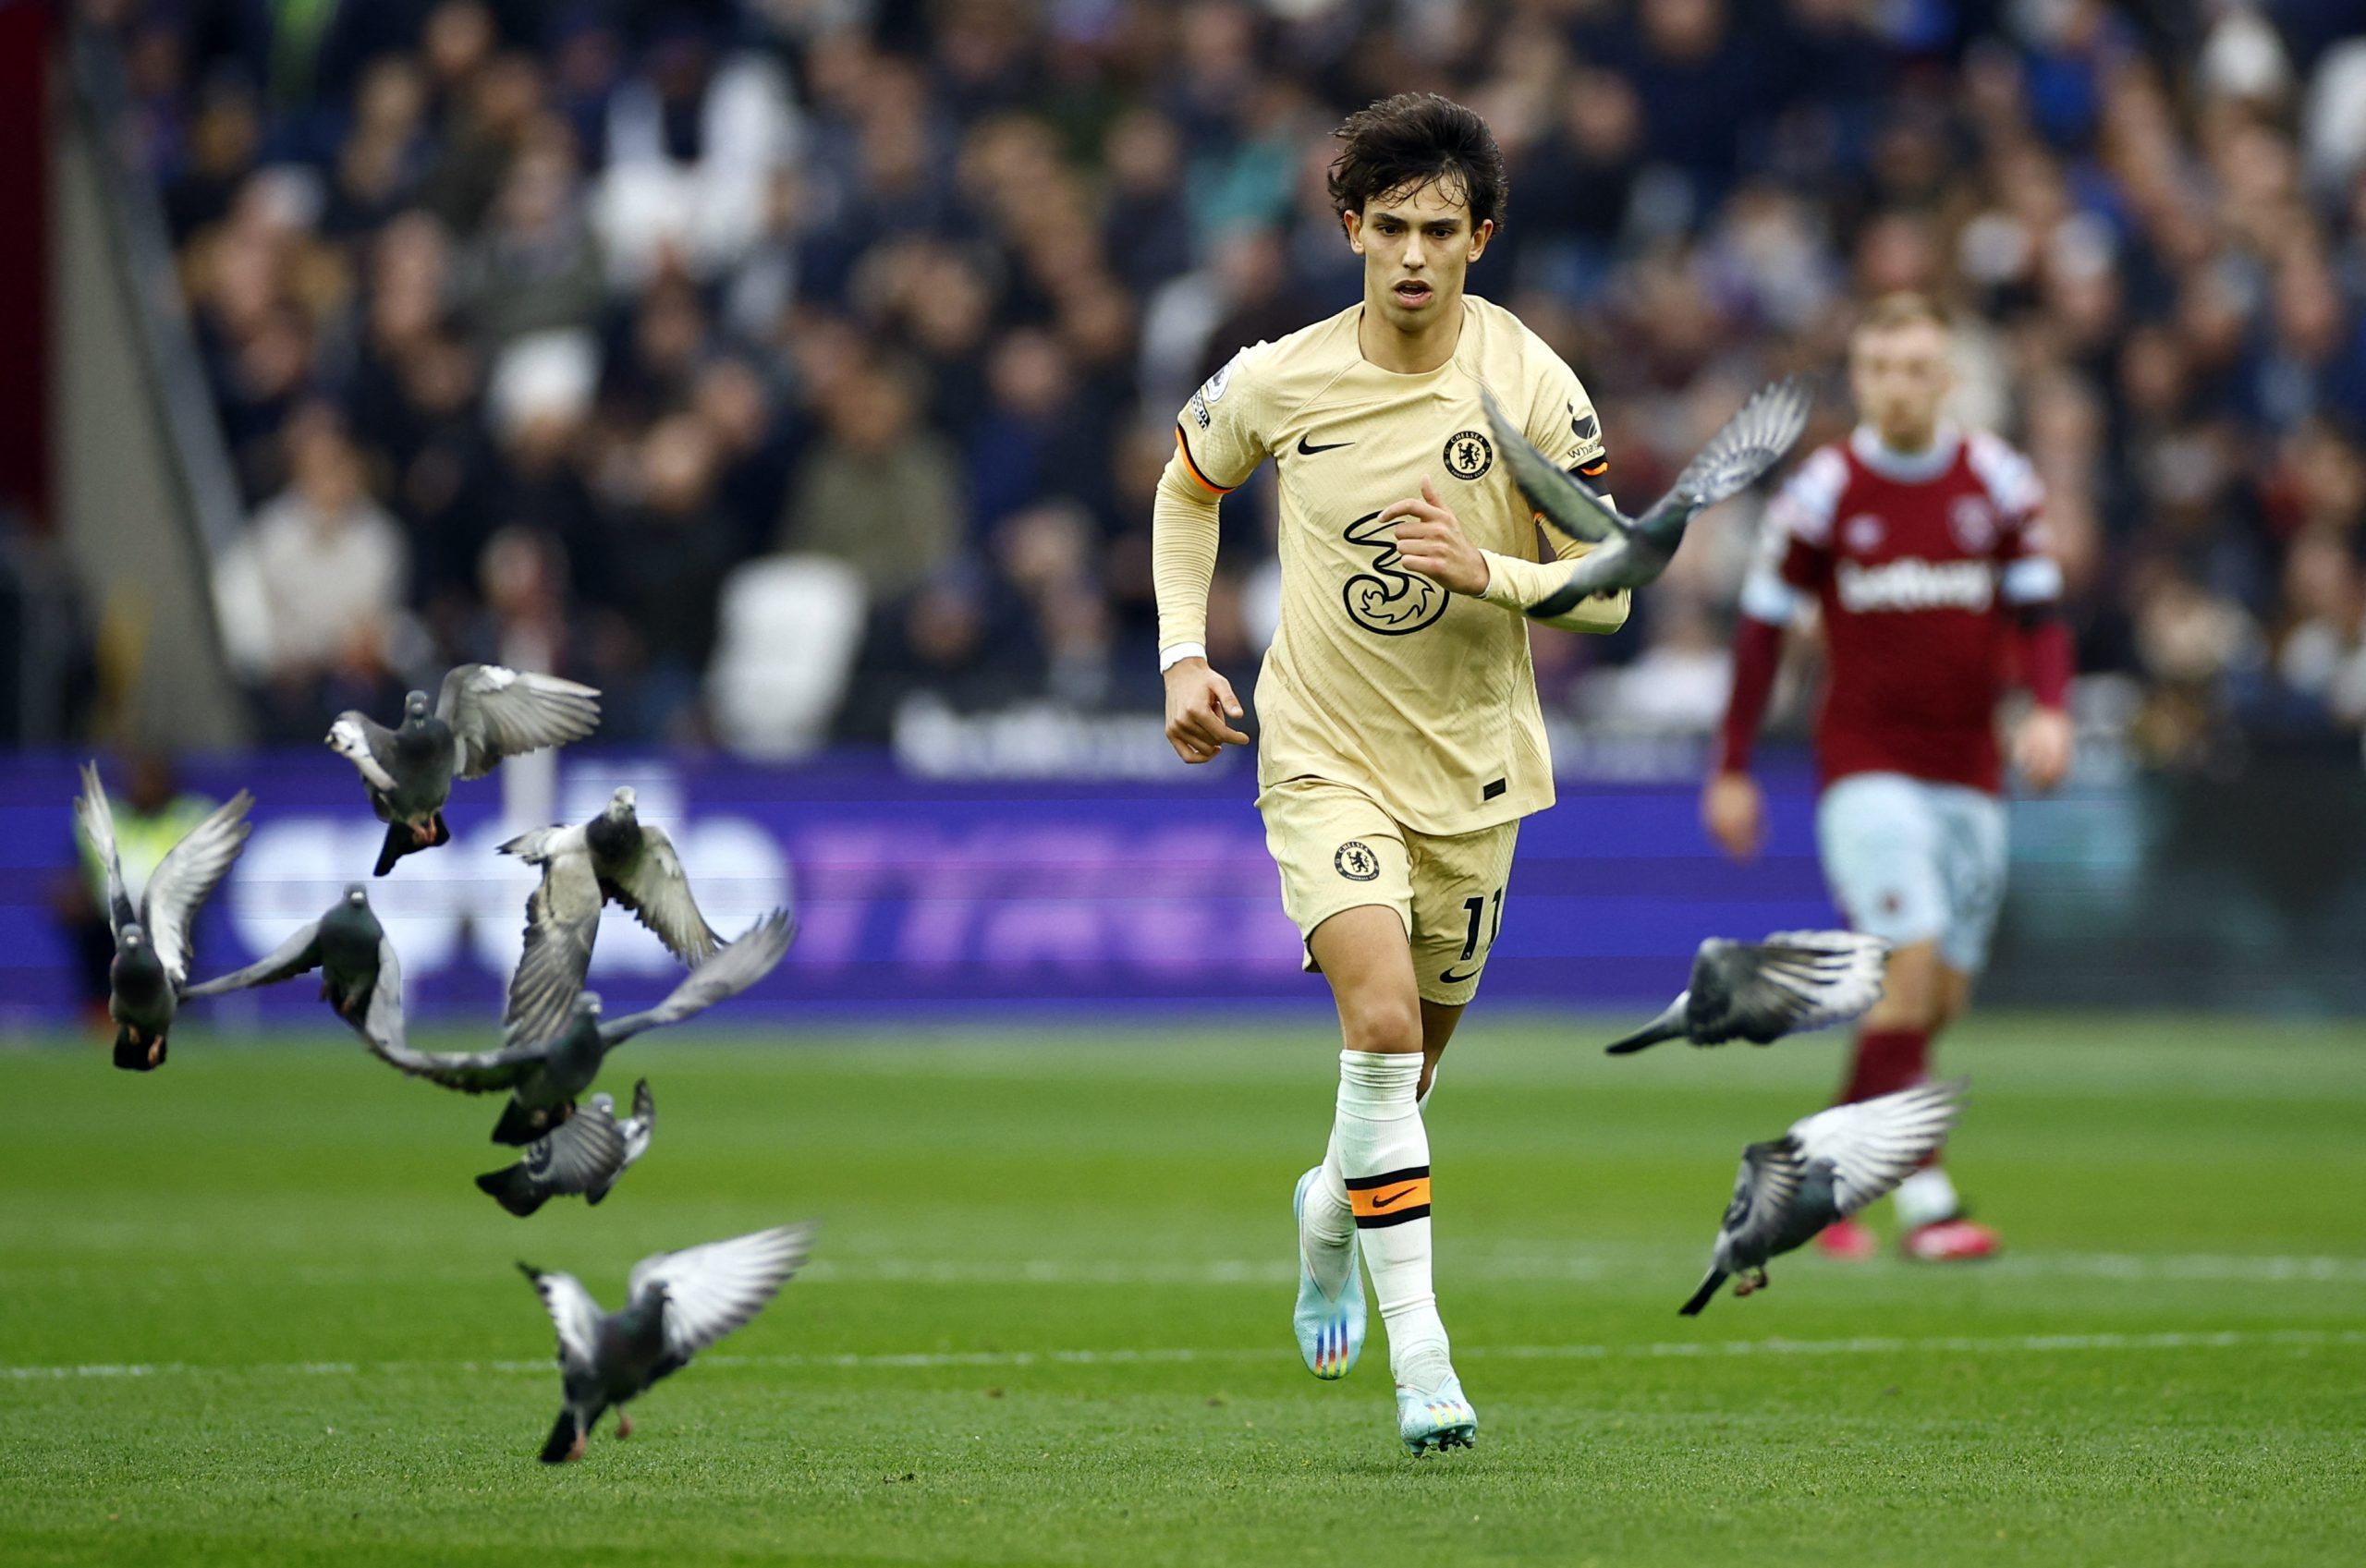 Soccer Football - Premier League - West Ham United v Chelsea - London Stadium, London, Britain - February 11, 2023 Chelsea's Joao Felix reacts as pigeons are seen on the pitch during the match Action Images via Reuters/John Sibley EDITORIAL USE ONLY. No use with unauthorized audio, video, data, fixture lists, club/league logos or 'live' services. Online in-match use limited to 75 images, no video emulation. No use in betting, games or single club /league/player publications.  Please contact your